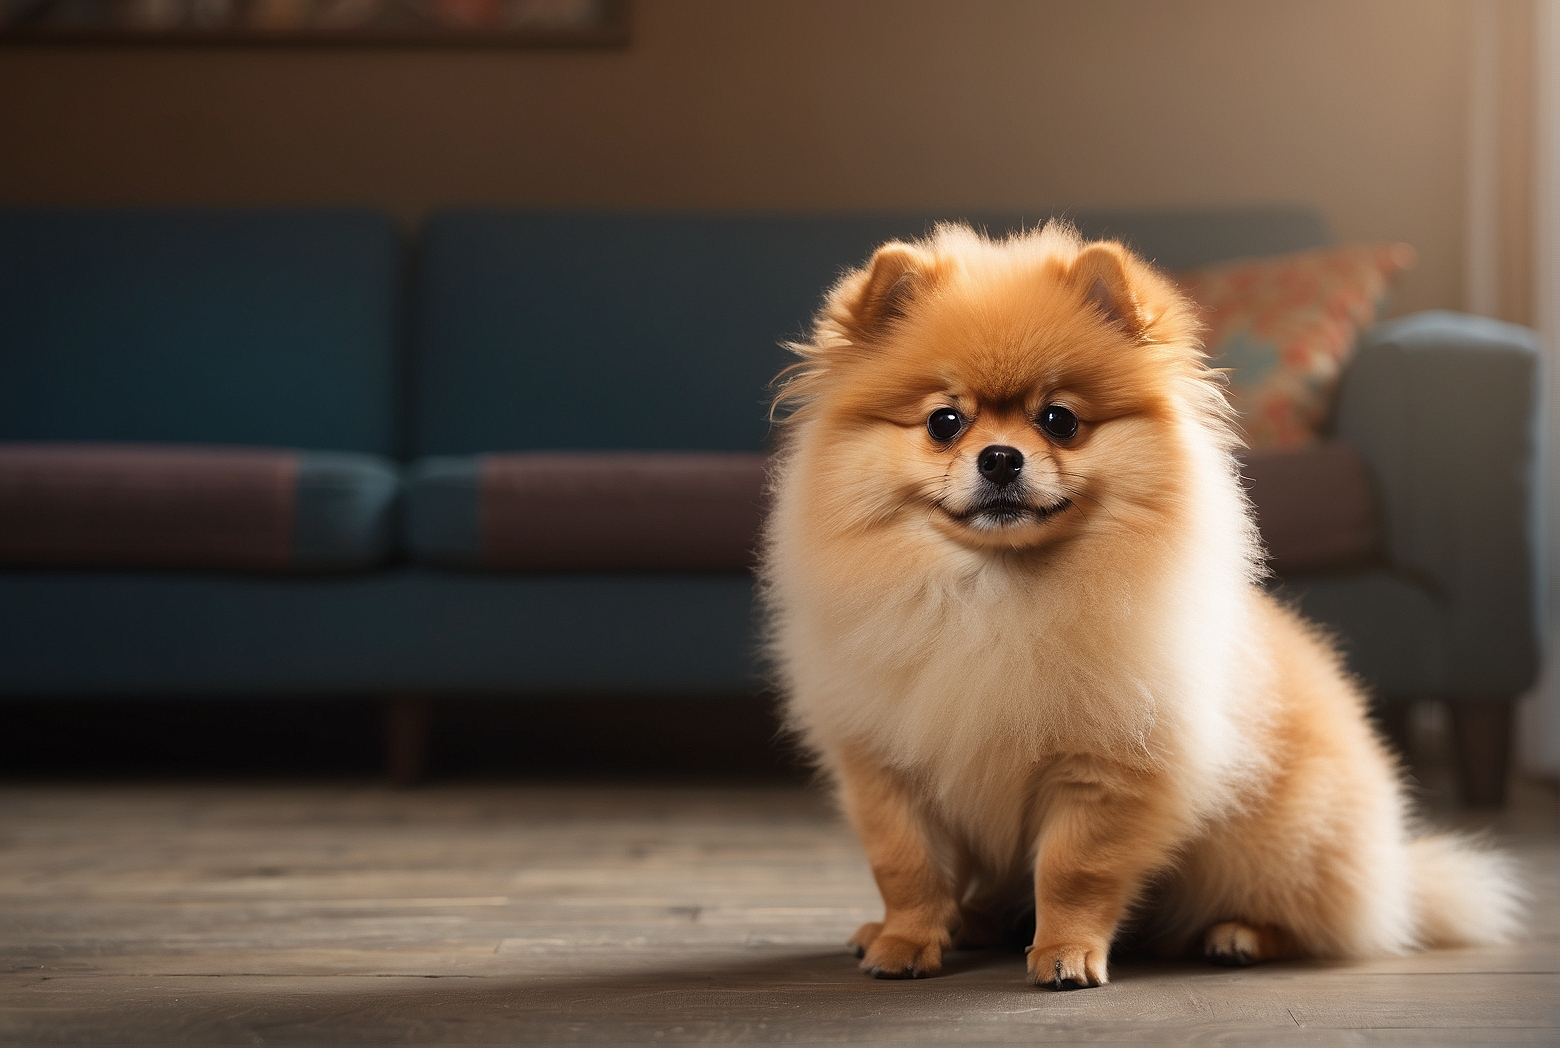 How long is the fur of a Pomeranian?